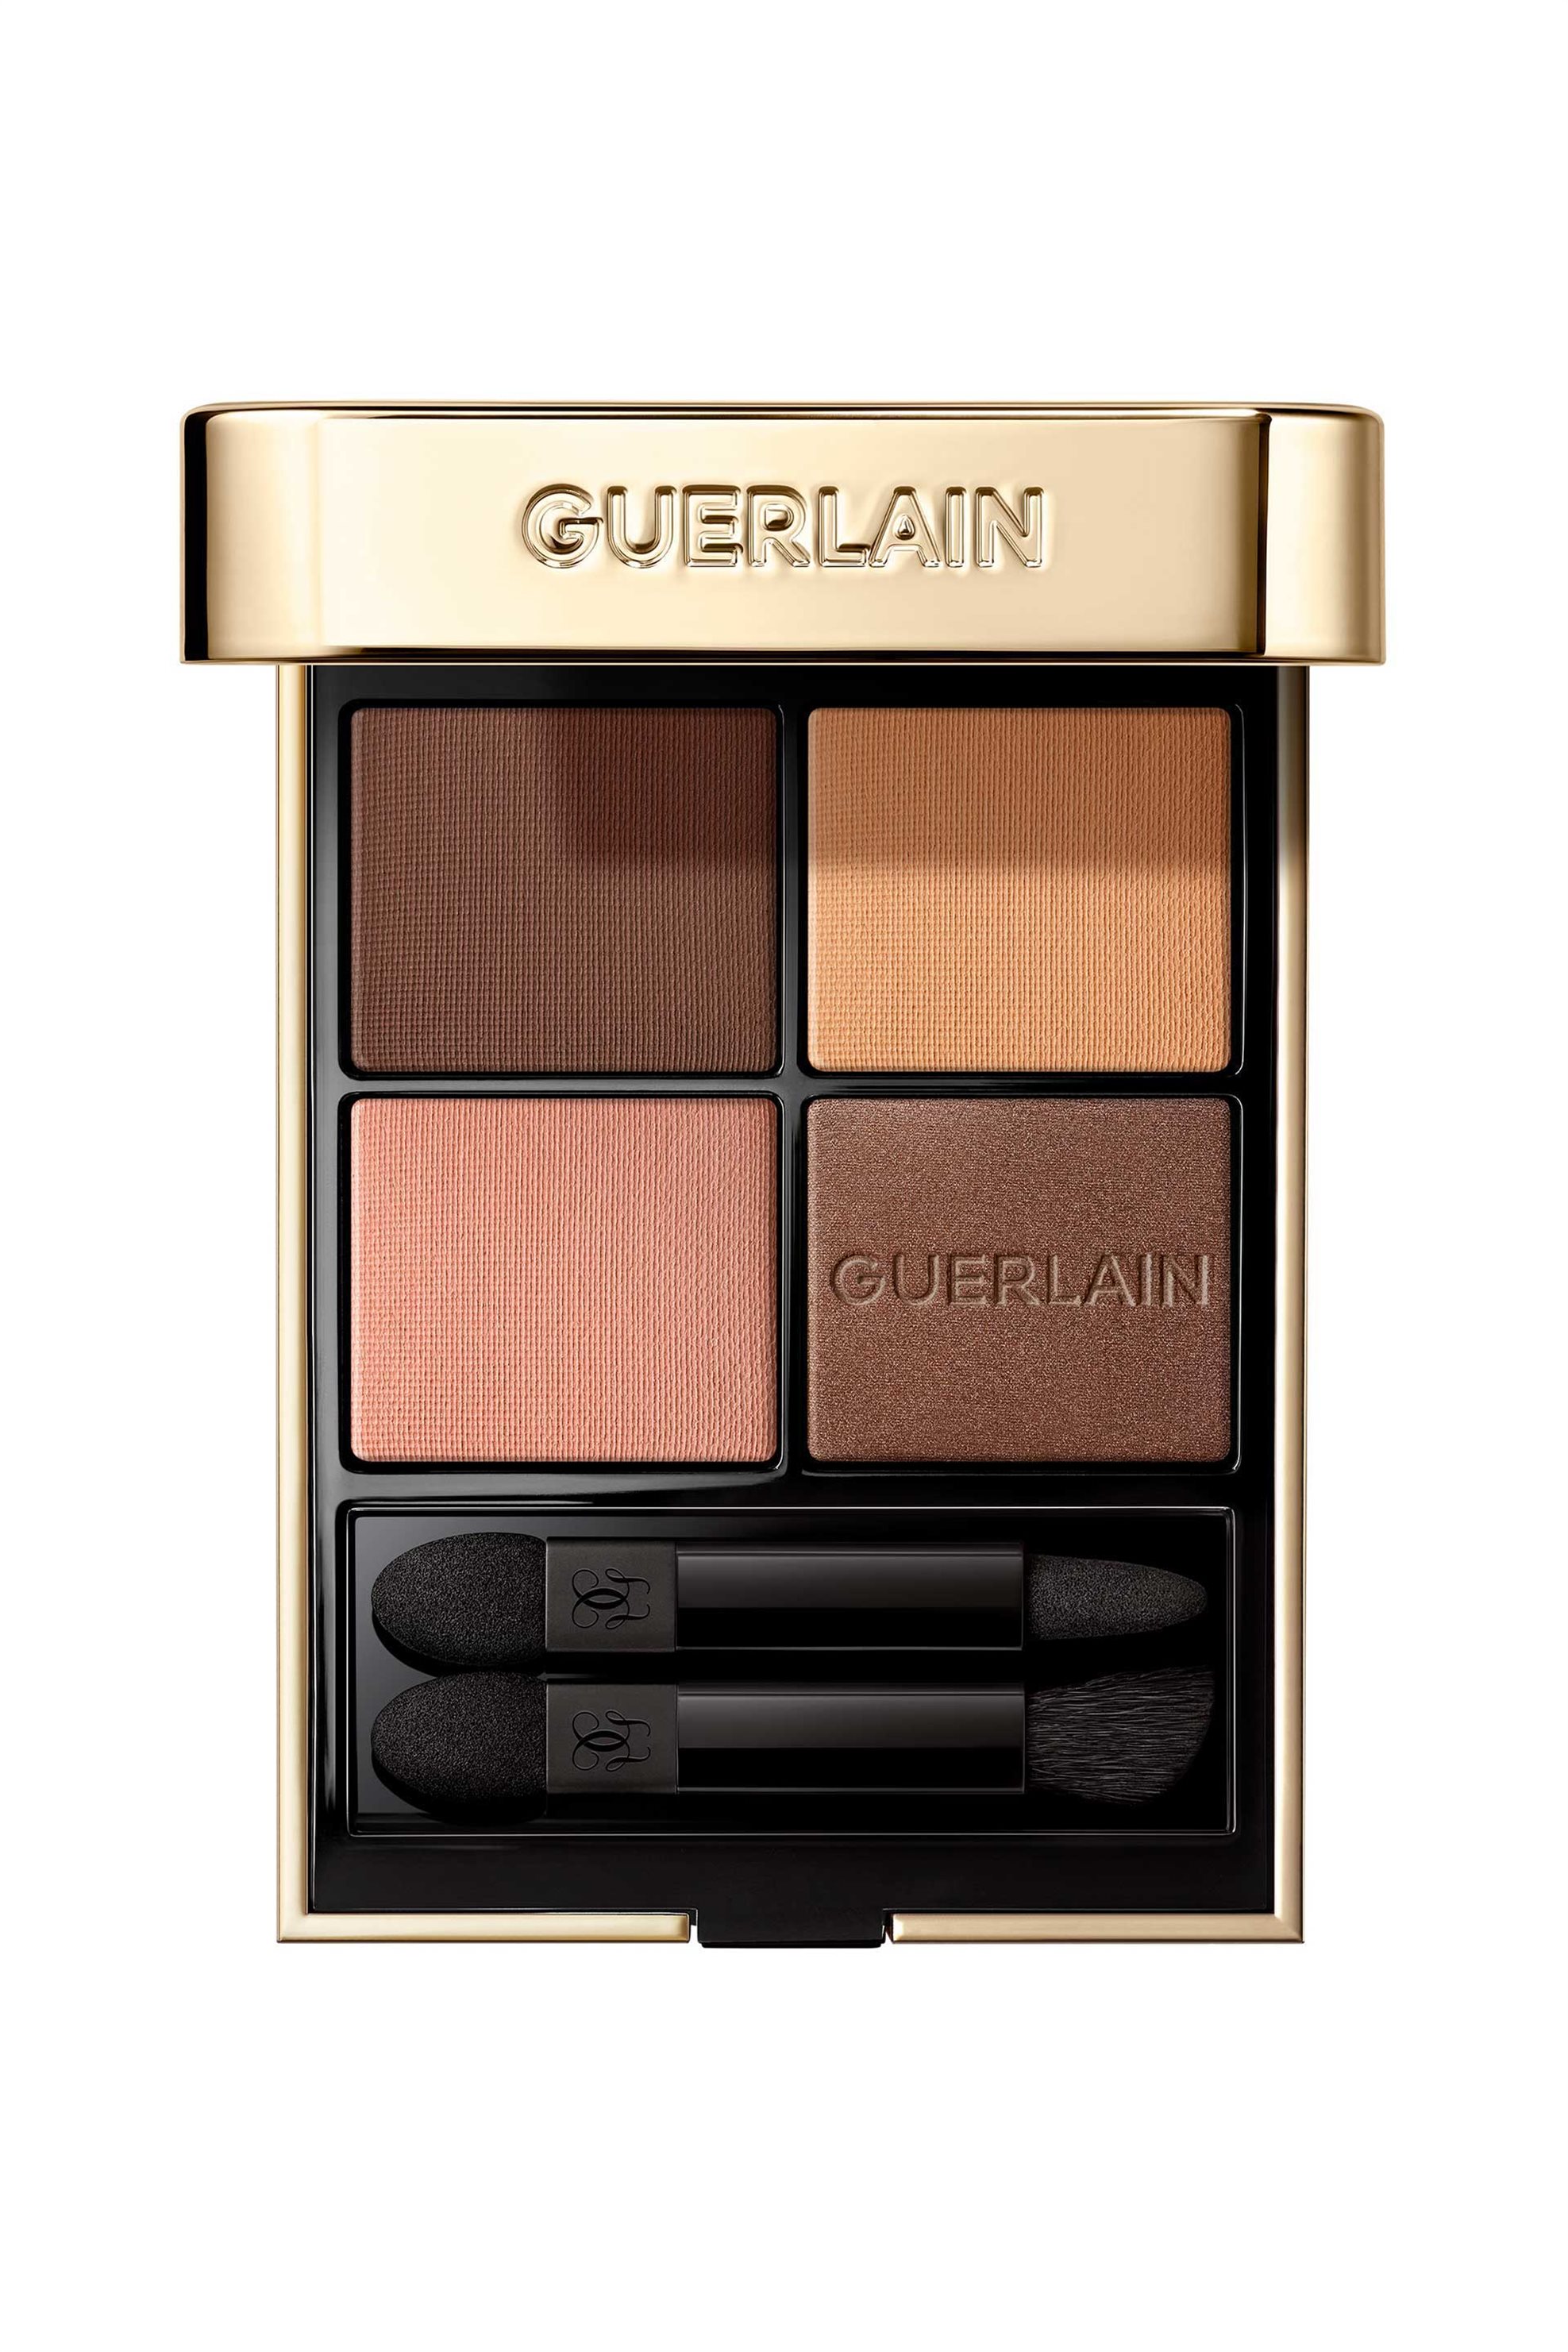 Guerlain Ombres G Eyeshadow Quad 258 Wild Nudes